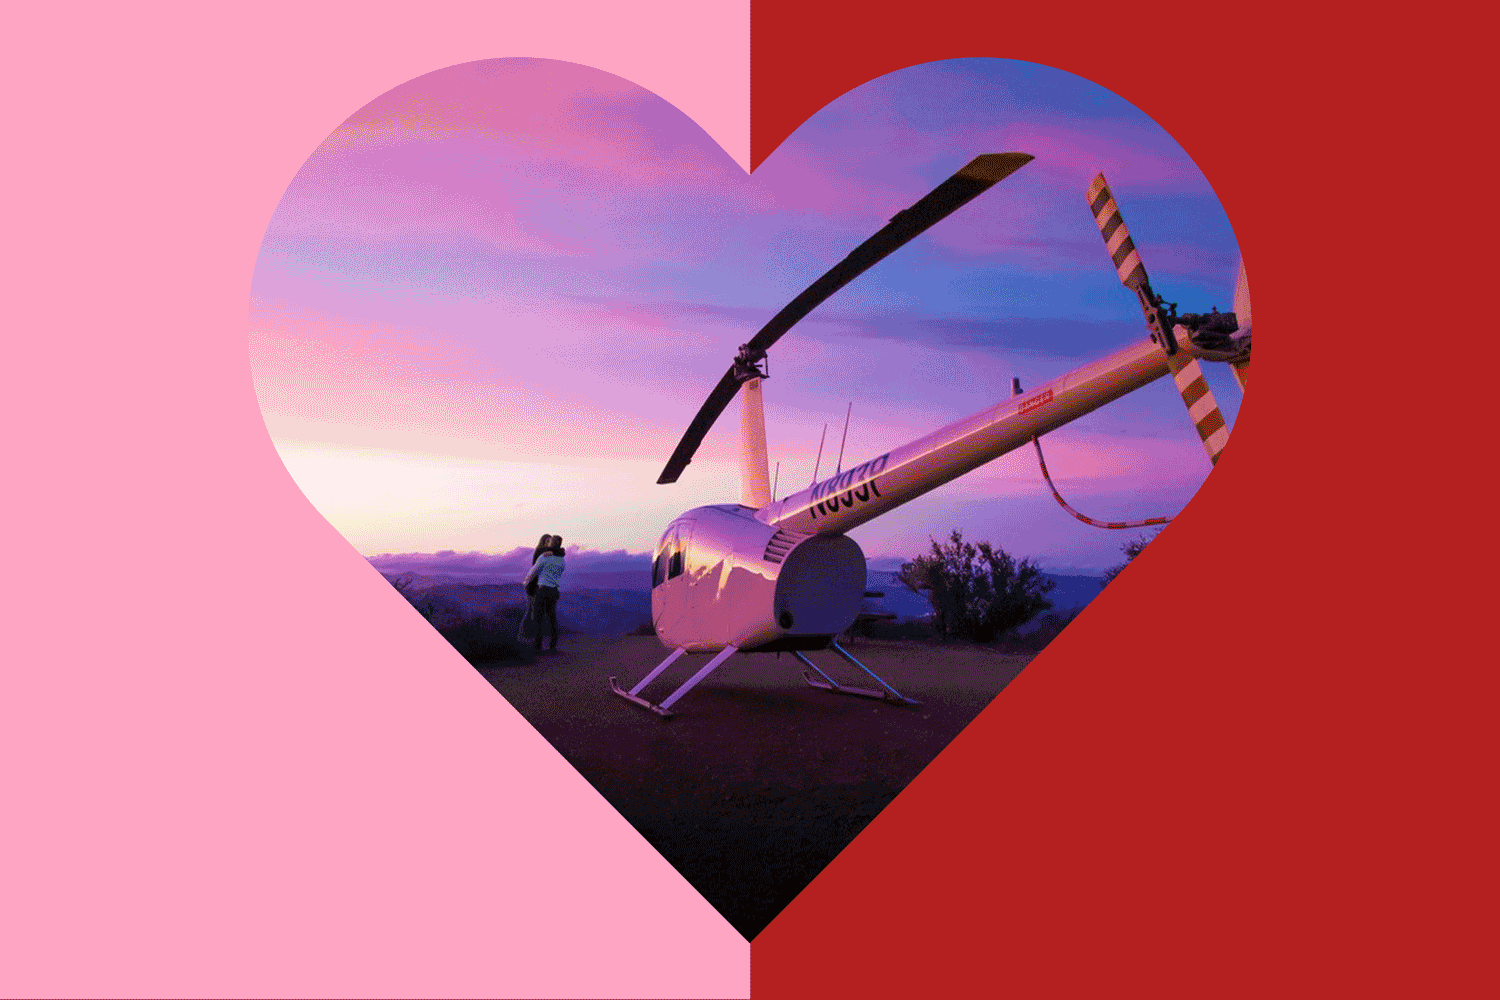 A pink and red background shows changing photos of a plane, beach, vineyard, garden and cocktail bar within a heart cutout